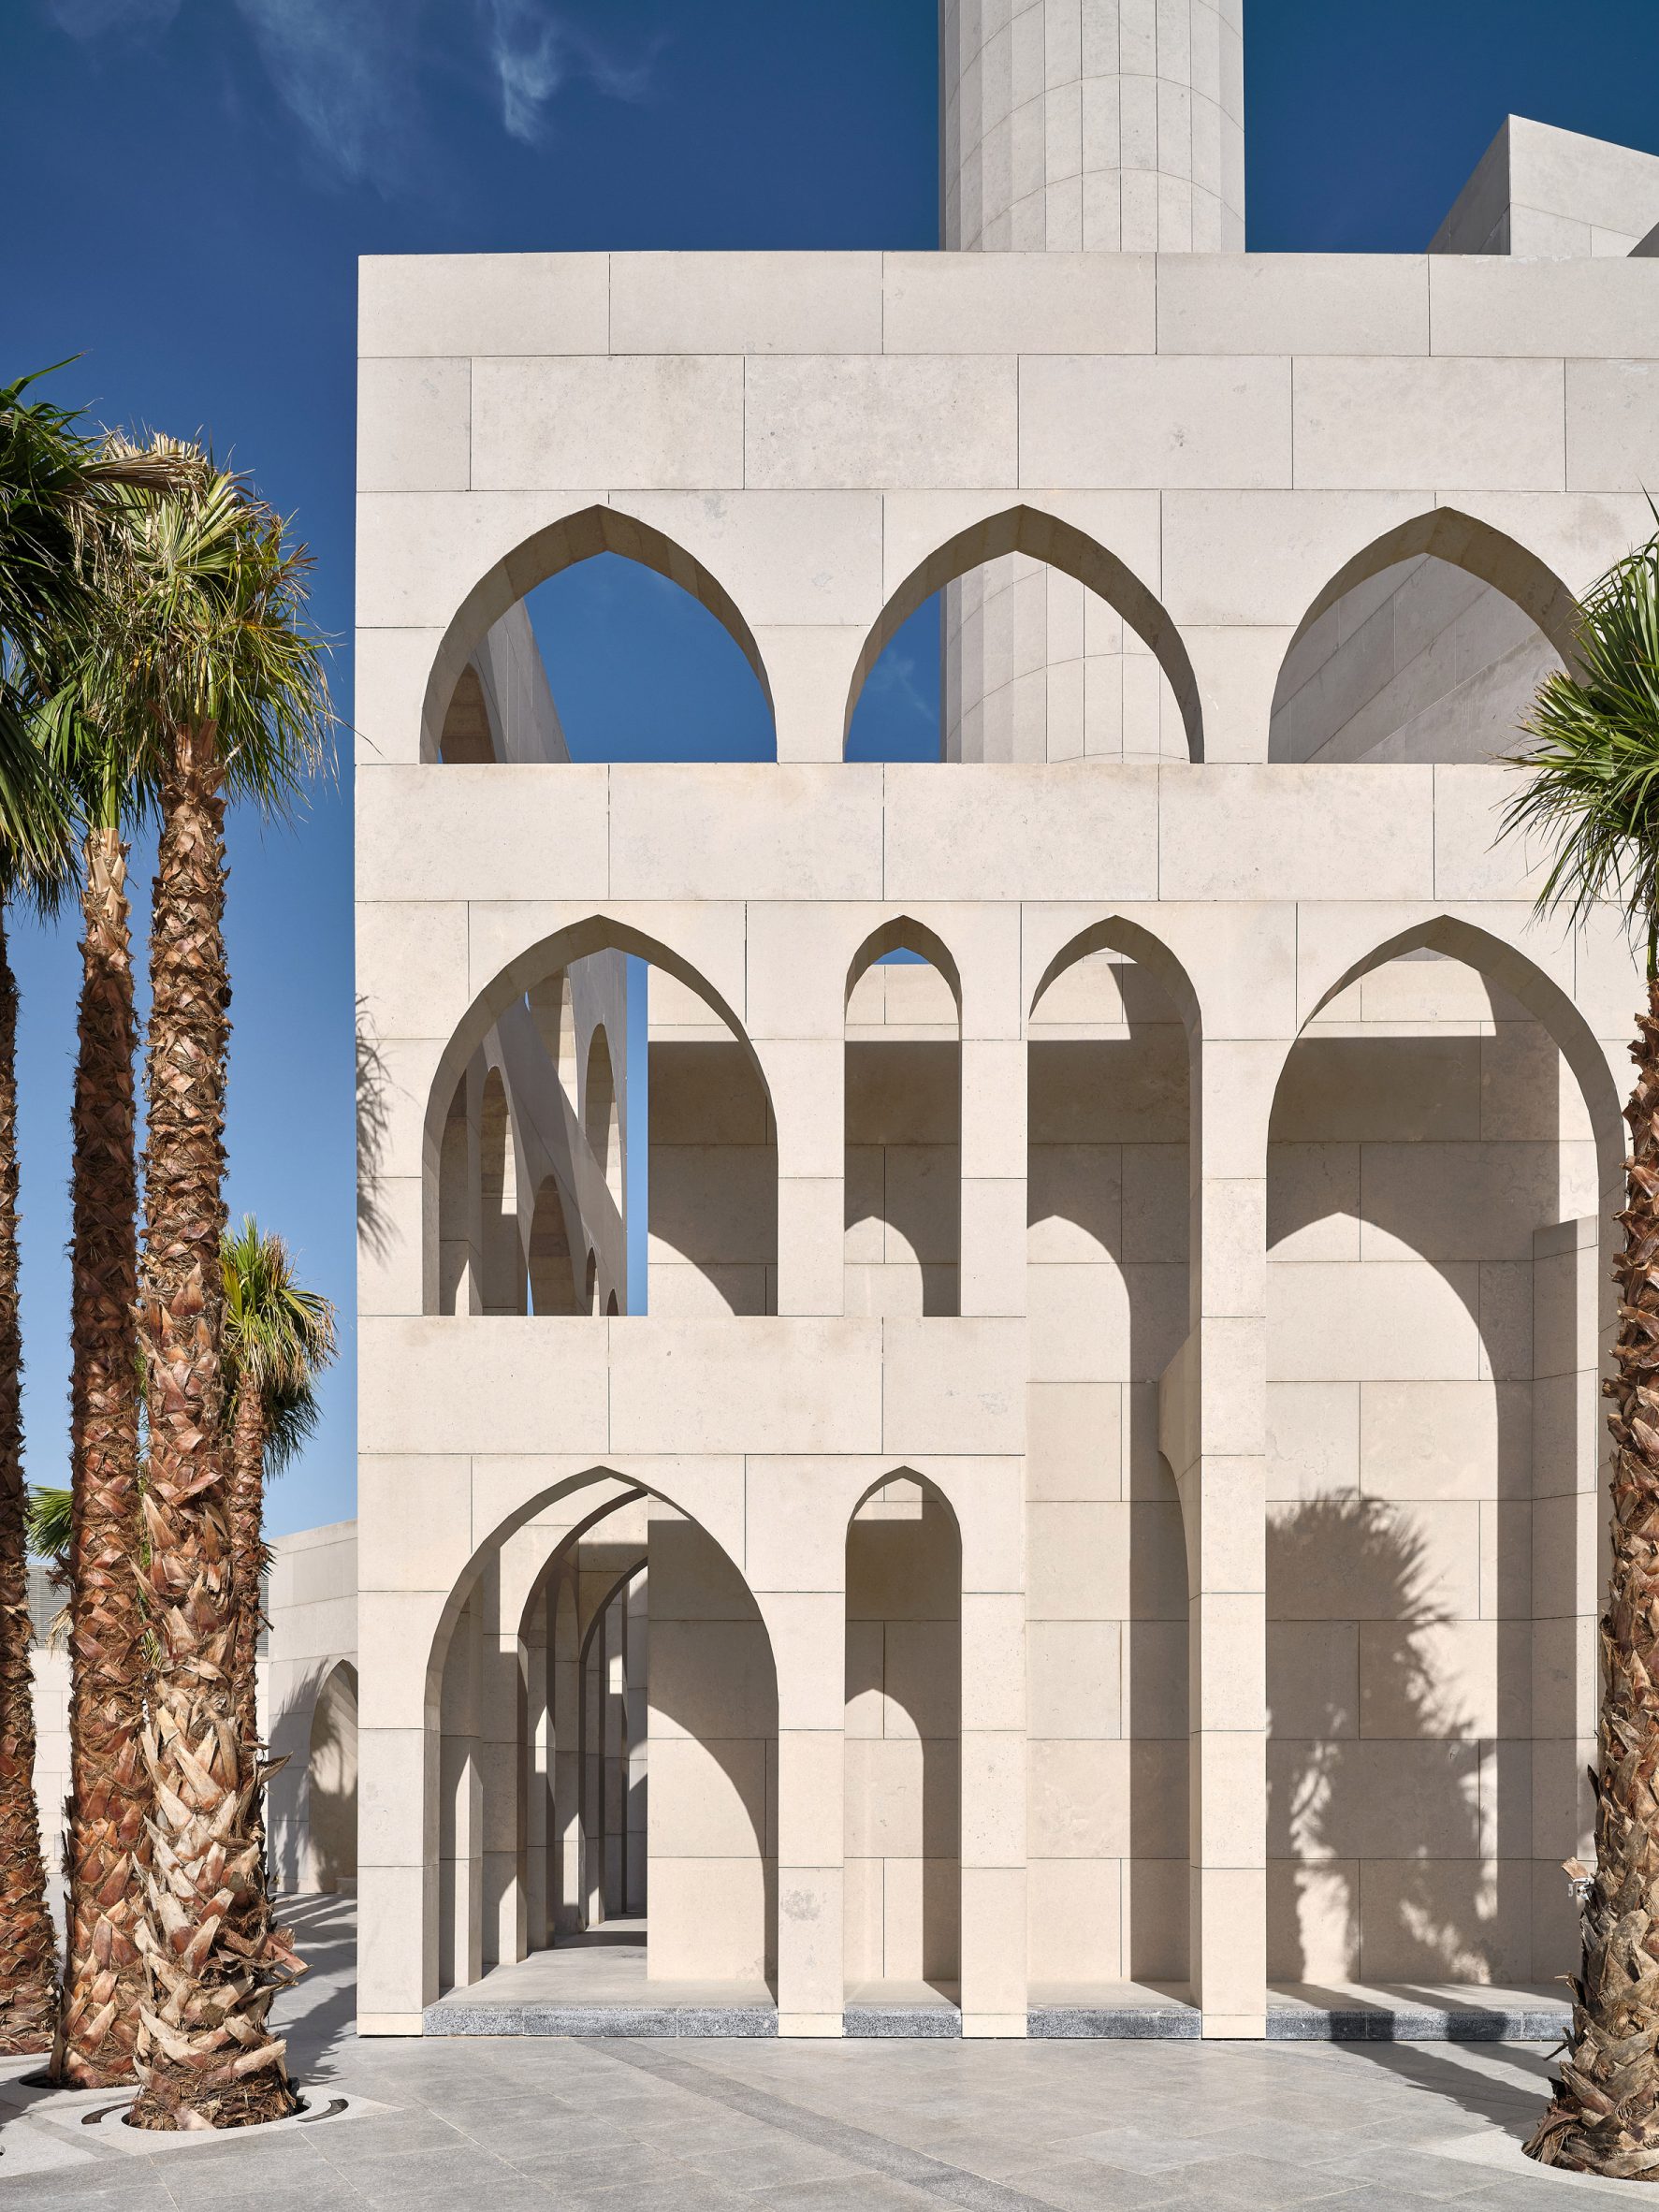 The studio used lancet arch cutouts to enrich the mosque's exteriors